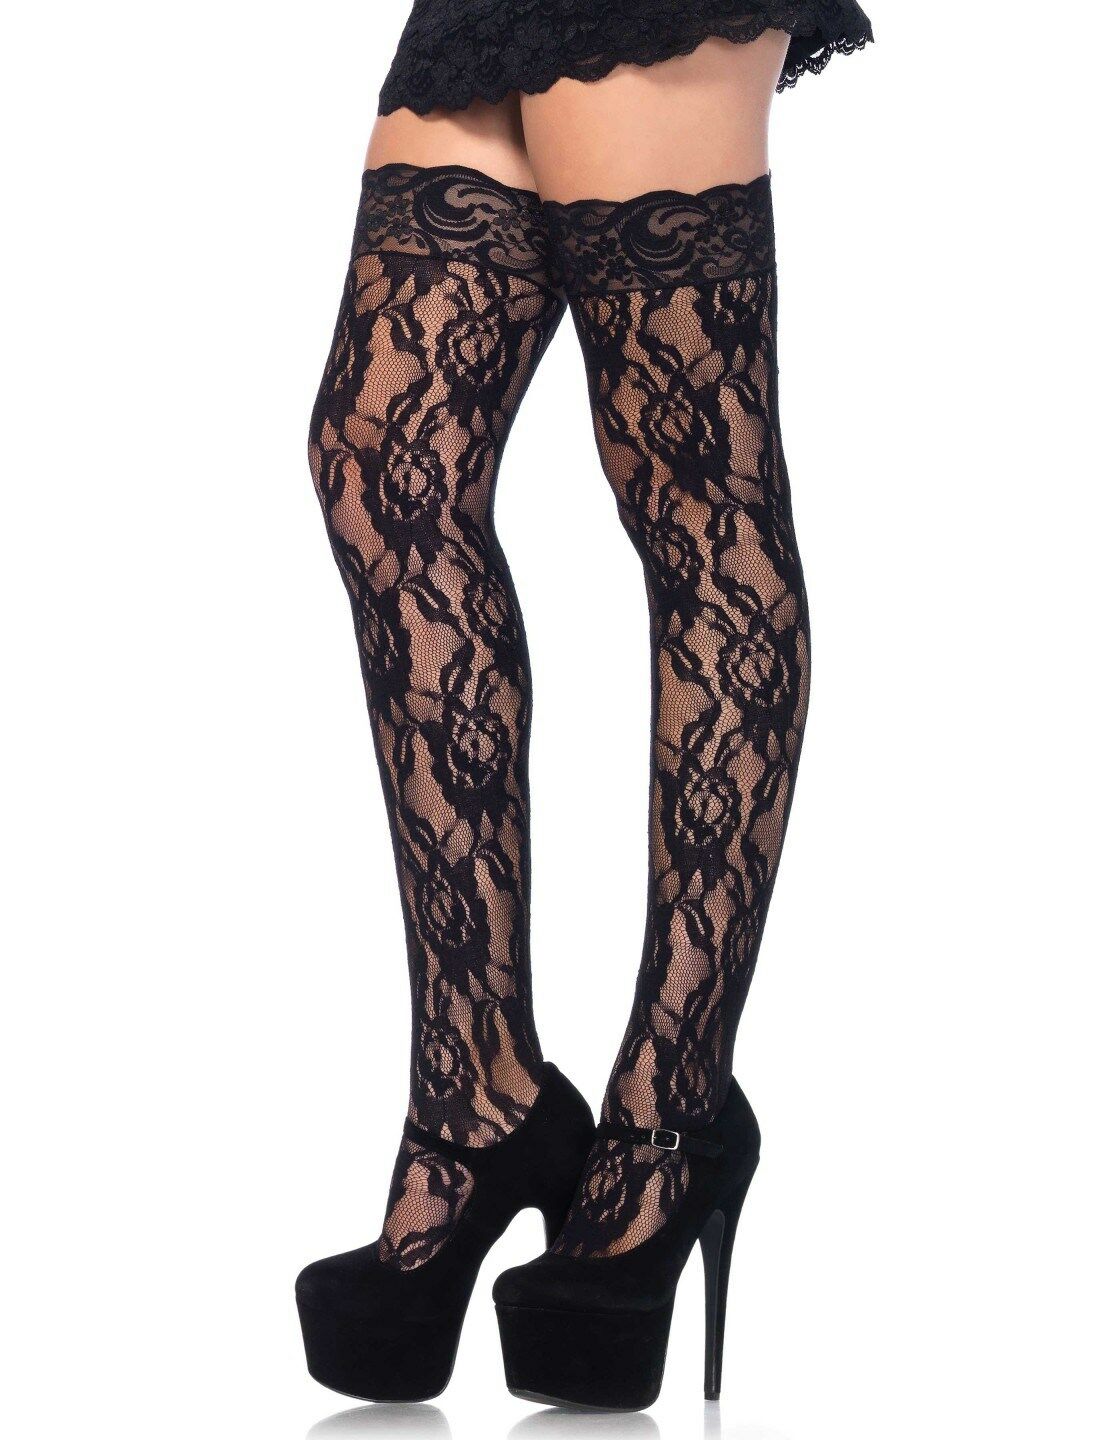 Black Rose Lace Stockings with Lace Top